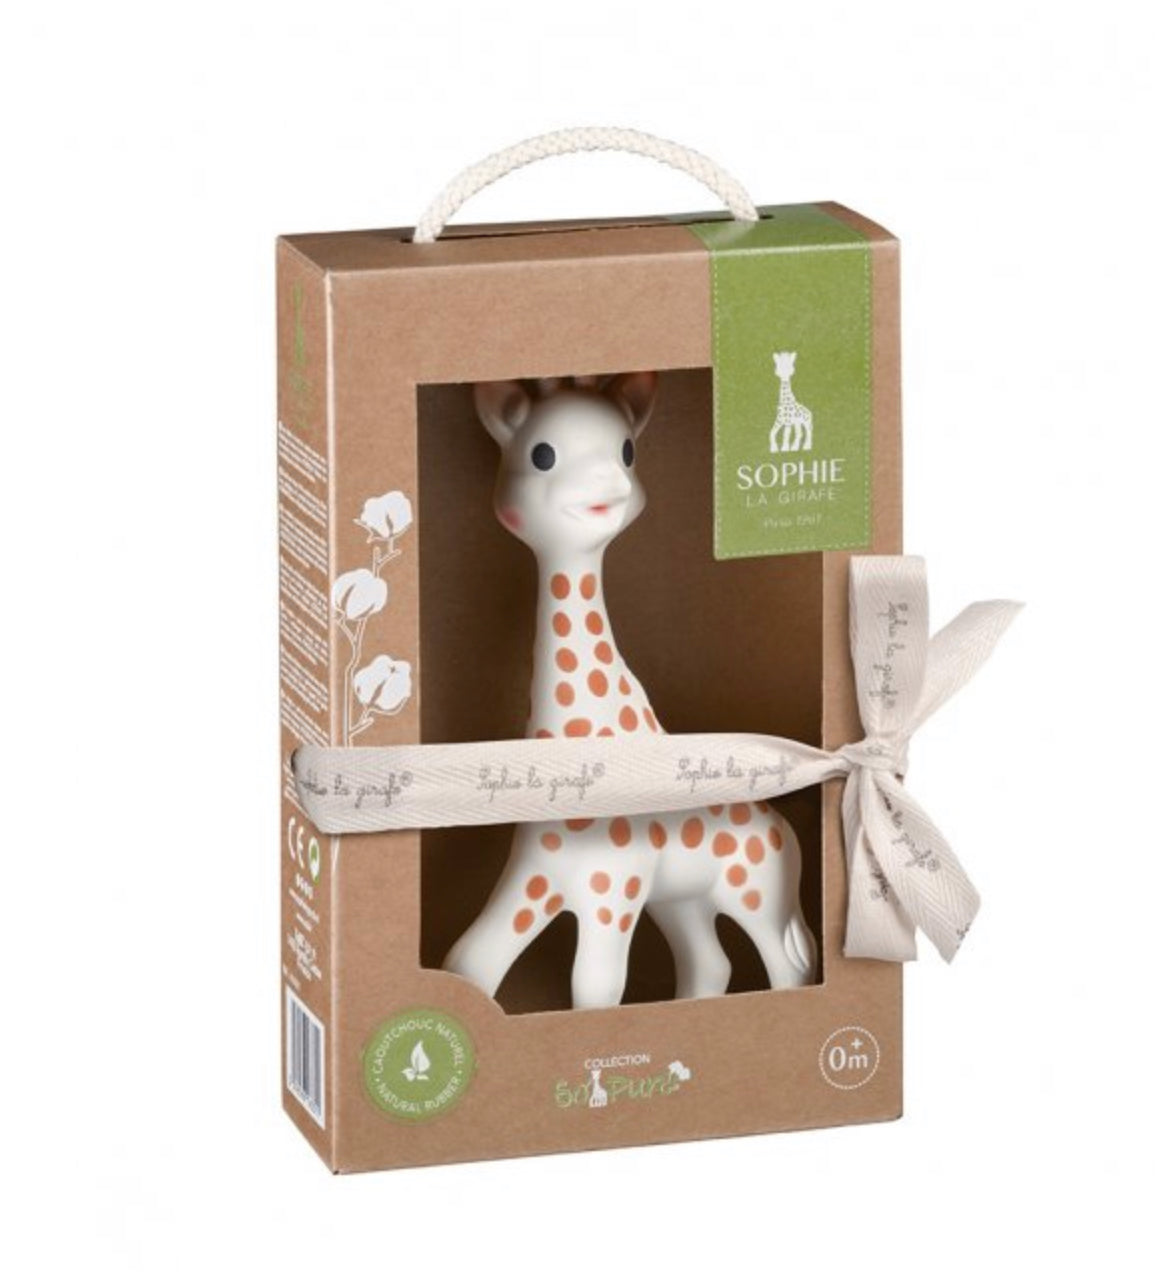 Load image into Gallery viewer, Sophie La Girafe So Pure Teether Toy
